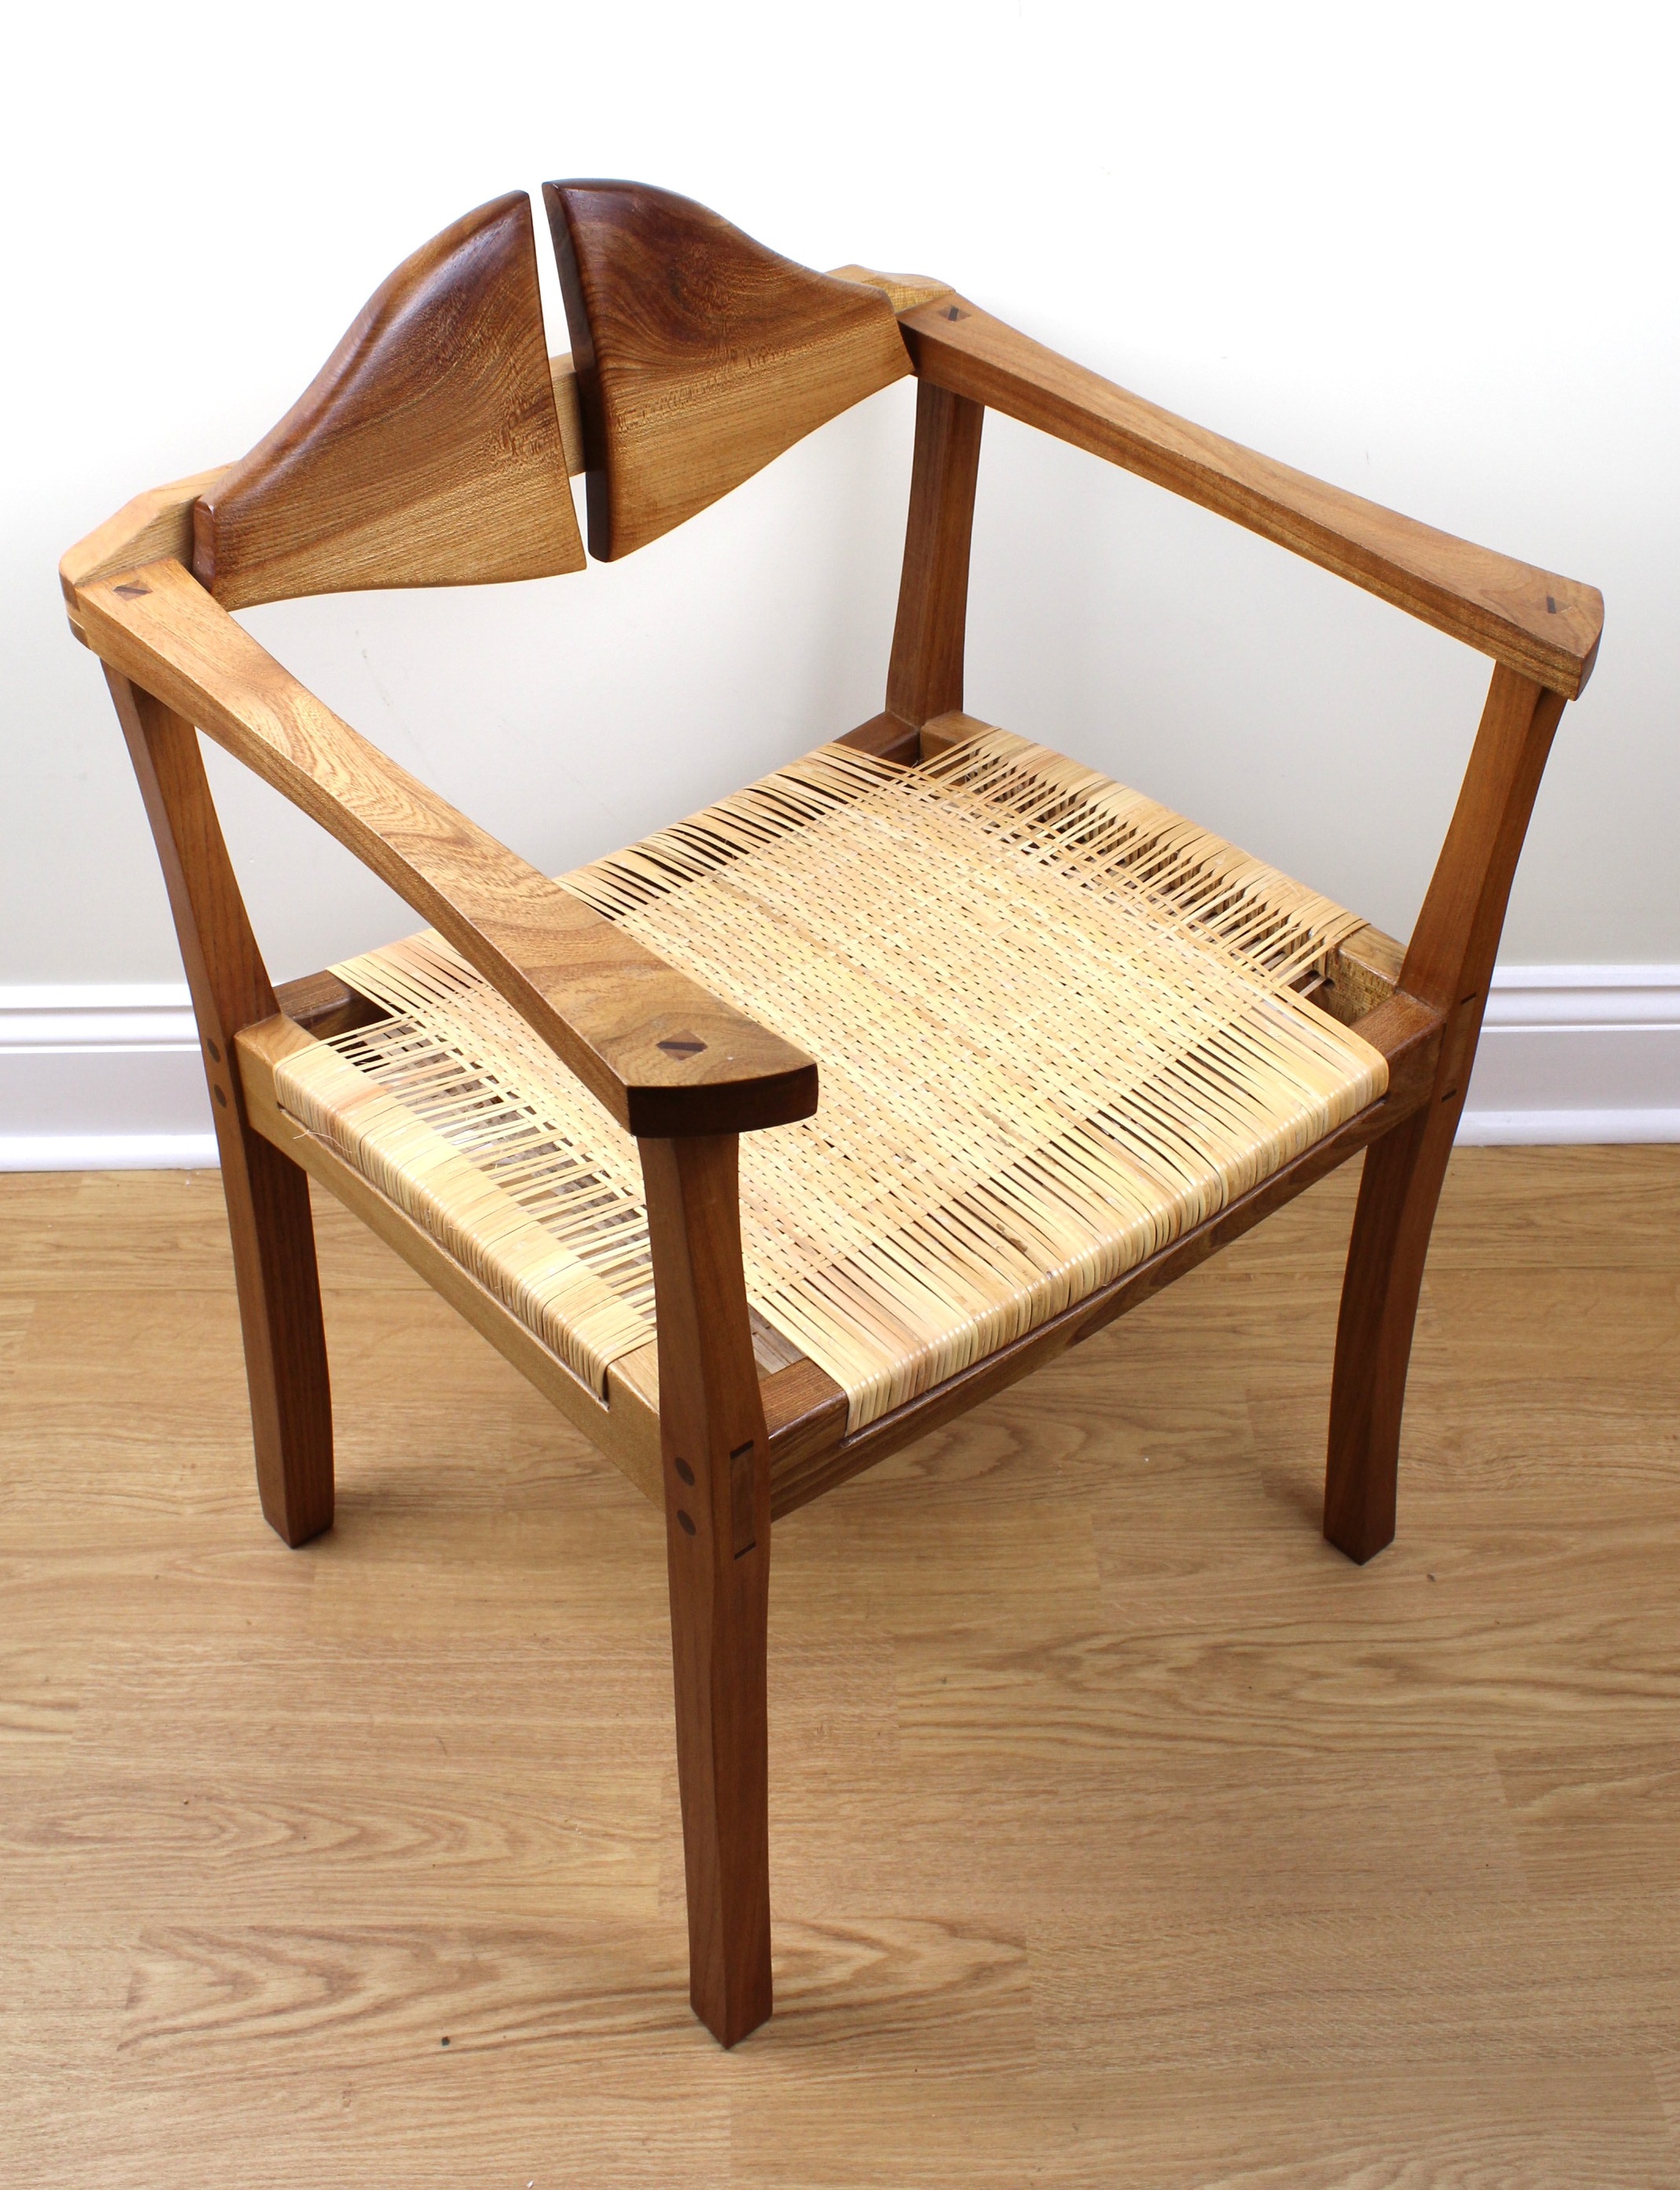 [ California Modern ] A 1970s elm and cane open arm chair by Gene L. Hackleman, employing the